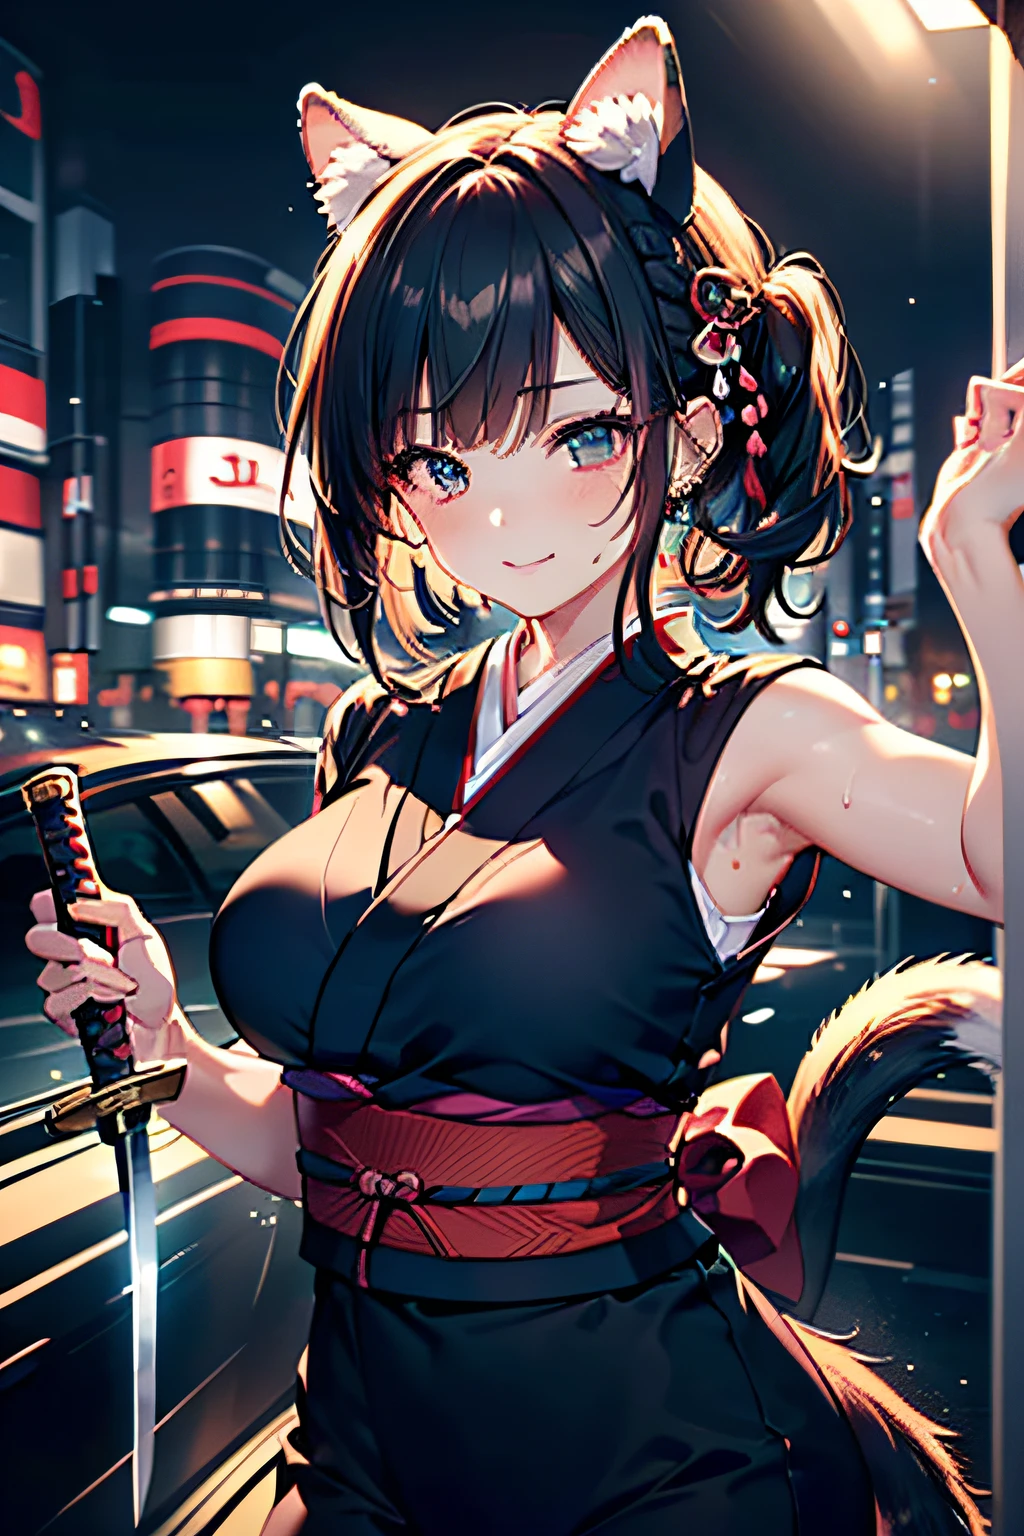 (((Animal ears,Animal tail,:1.7))),(((Female Ninja Cosplay:1,7))),(((Kunoichi armed with a Japan sword:1.7))),(((Enhance driving motion with motion blur effect:1.7))),(beautiful a girl),(((Night lighting:1.3))),breast slip,Blushing cheeks、shyly smile,bbw,(Short hair in shiny silver and orange inner colors,Floral hair ornament,Floral braided top knot,Twisted Side Part Ponytail,Floral braided headband,half up、Floral Braided Space Van,Voluminous Fishtail Braids,Twisted chignon,),(Bangs are see-through bangs),(((emphasizing breasts:1.3))),(Dynamic angles),(Dynamic and sexy poses),(bending forward:1.3),(((Dignified statue))),(((hair pin,a necklace,piercings))),Colossal ,Blush with embarrassment,Enraptured eyes,A smile that beguiles the viewer,skin glistening with sweat,gazing at viewer,Disturbance of clothing due to movement,pointed red mouth,Perfect round face,,Proper body proportion,Intricate details,Very delicate and beautiful hair,photos realistic,Dreamy,Professional Movie Lighting,realistic shadow,Solo Focus,Beautiful hands,Beautiful fingers,Detailed finger features,detailed clothes features,Detailed hair features,detailed facial features,(masutepiece,top-quality,Ultra-high resolution output image,) ,(The 8k quality,),(Sea Art 2 Mode.1),(Image Mode Ultra HD,)